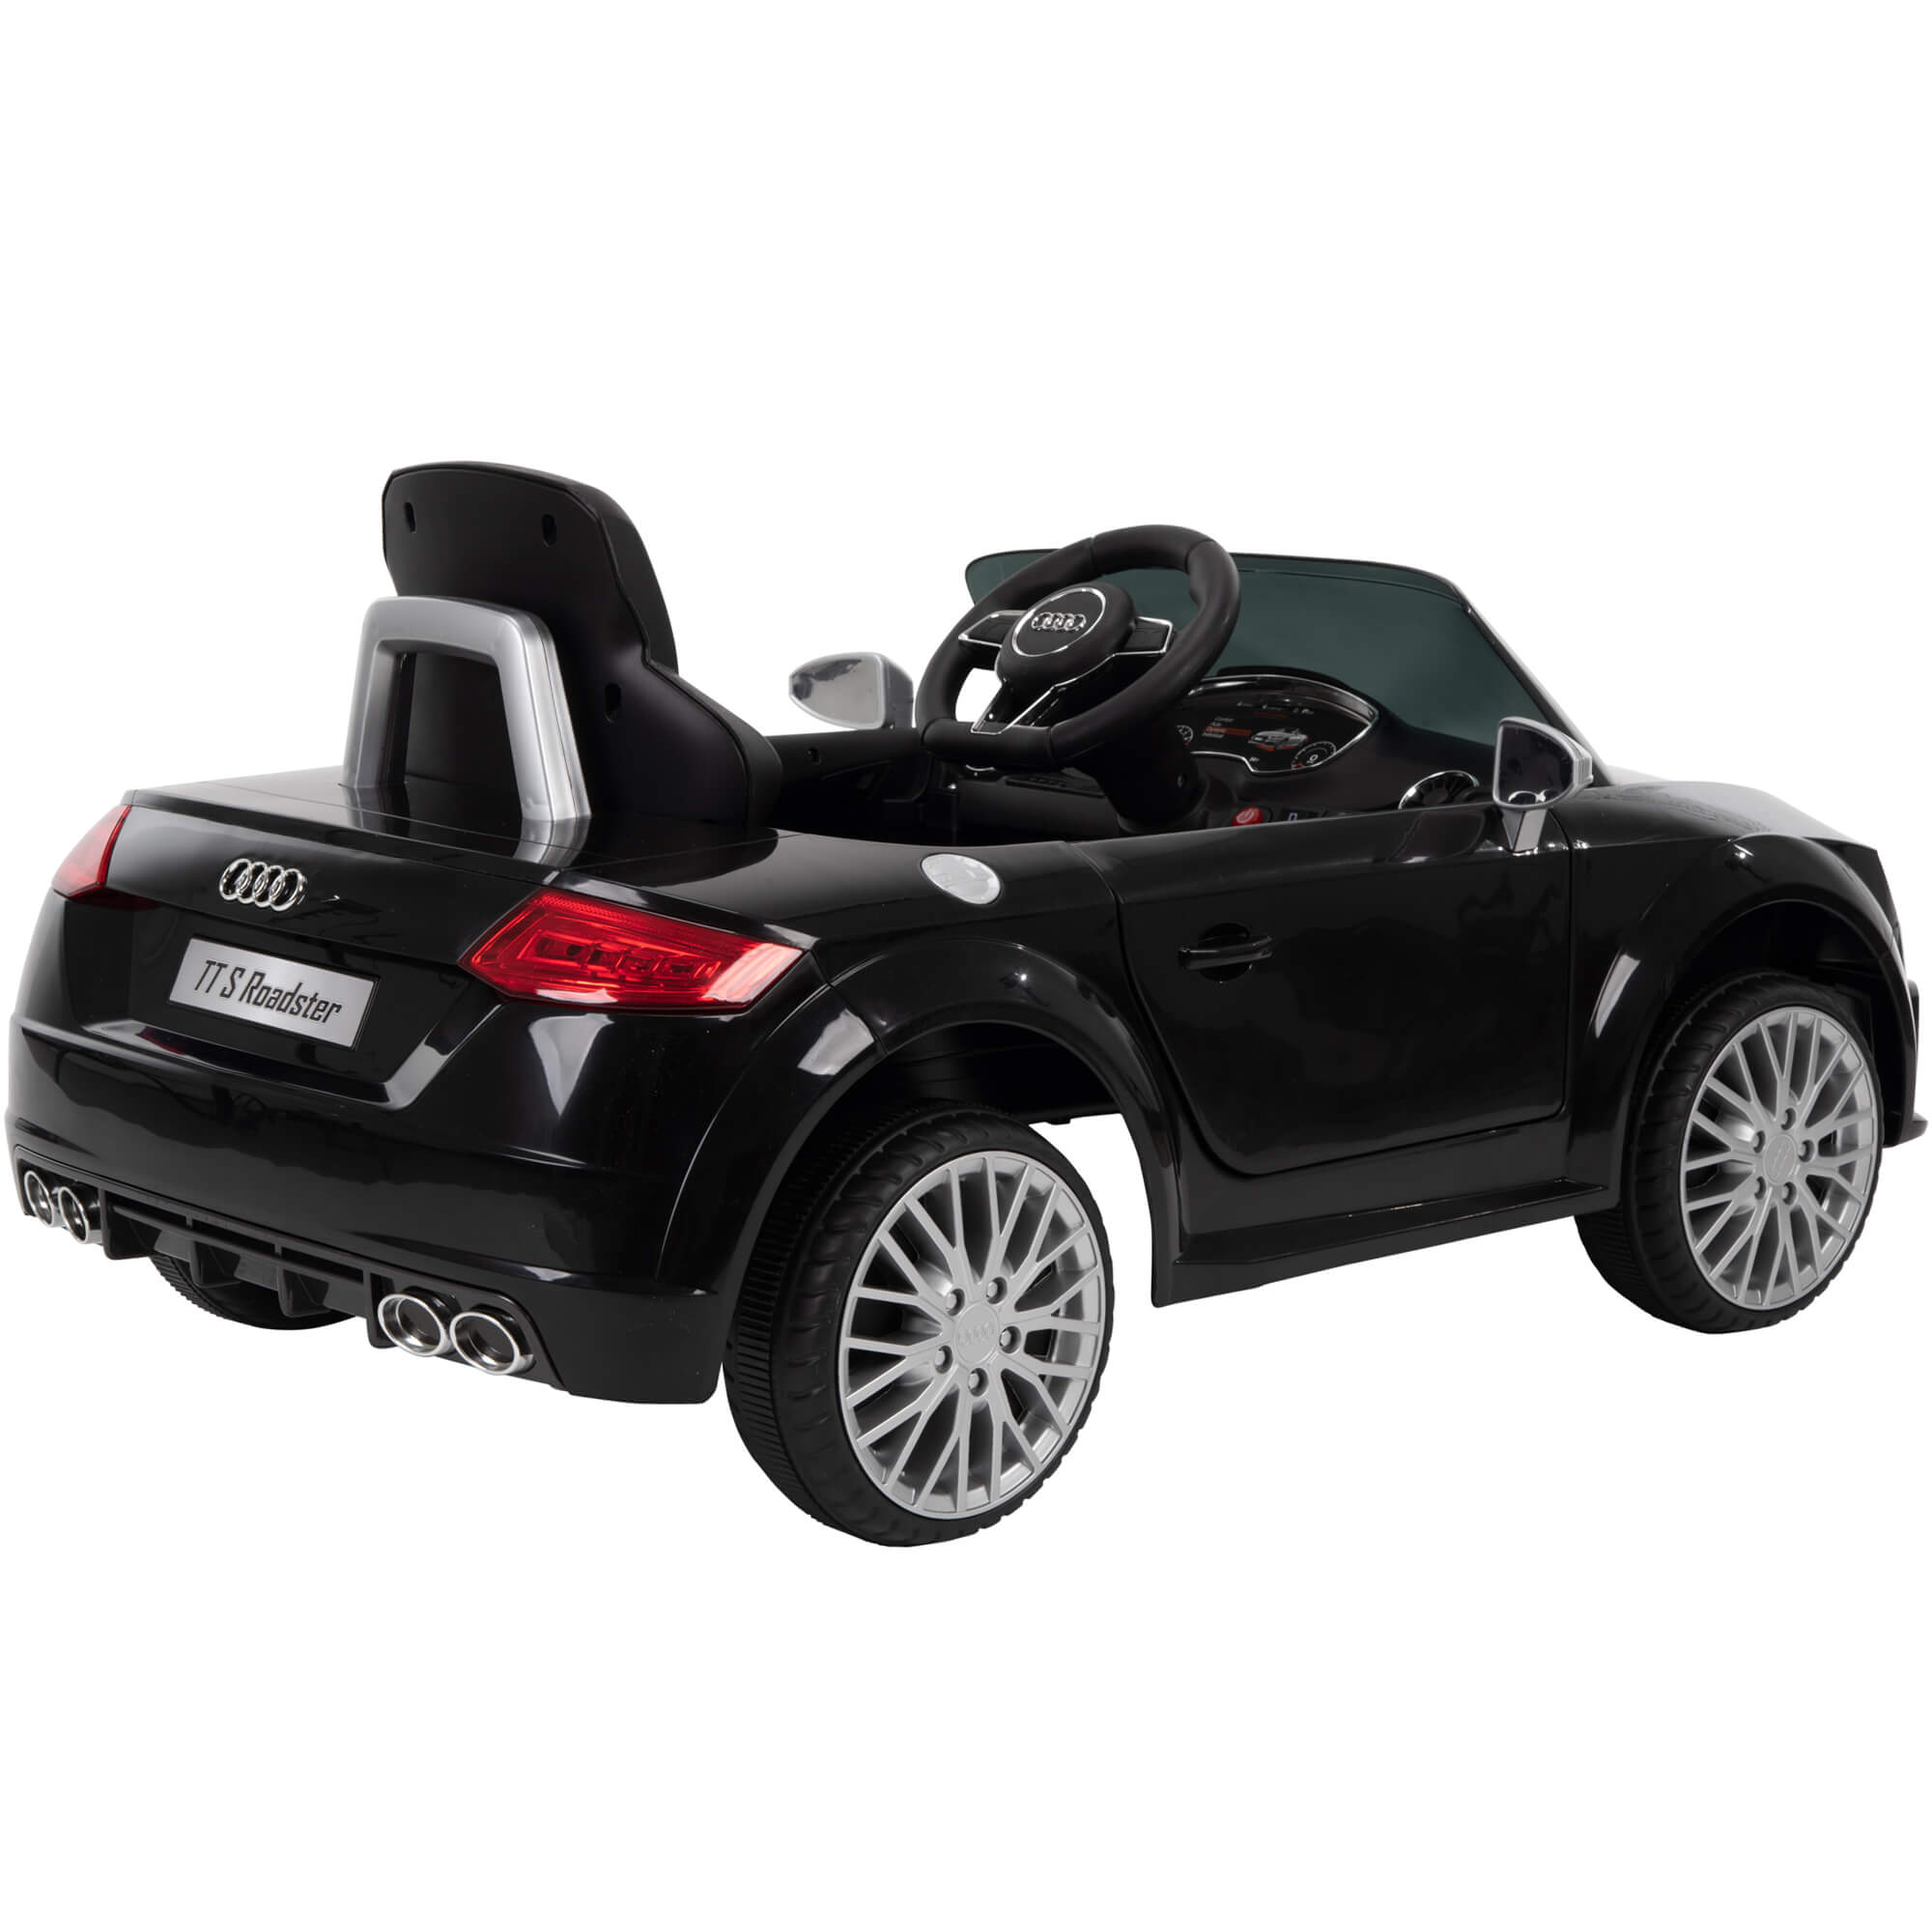 12 Volts Audi Electric Battery-Powered Ride-on Car, for Children ages 3+ Years, Black, by Huffy - image 5 of 6